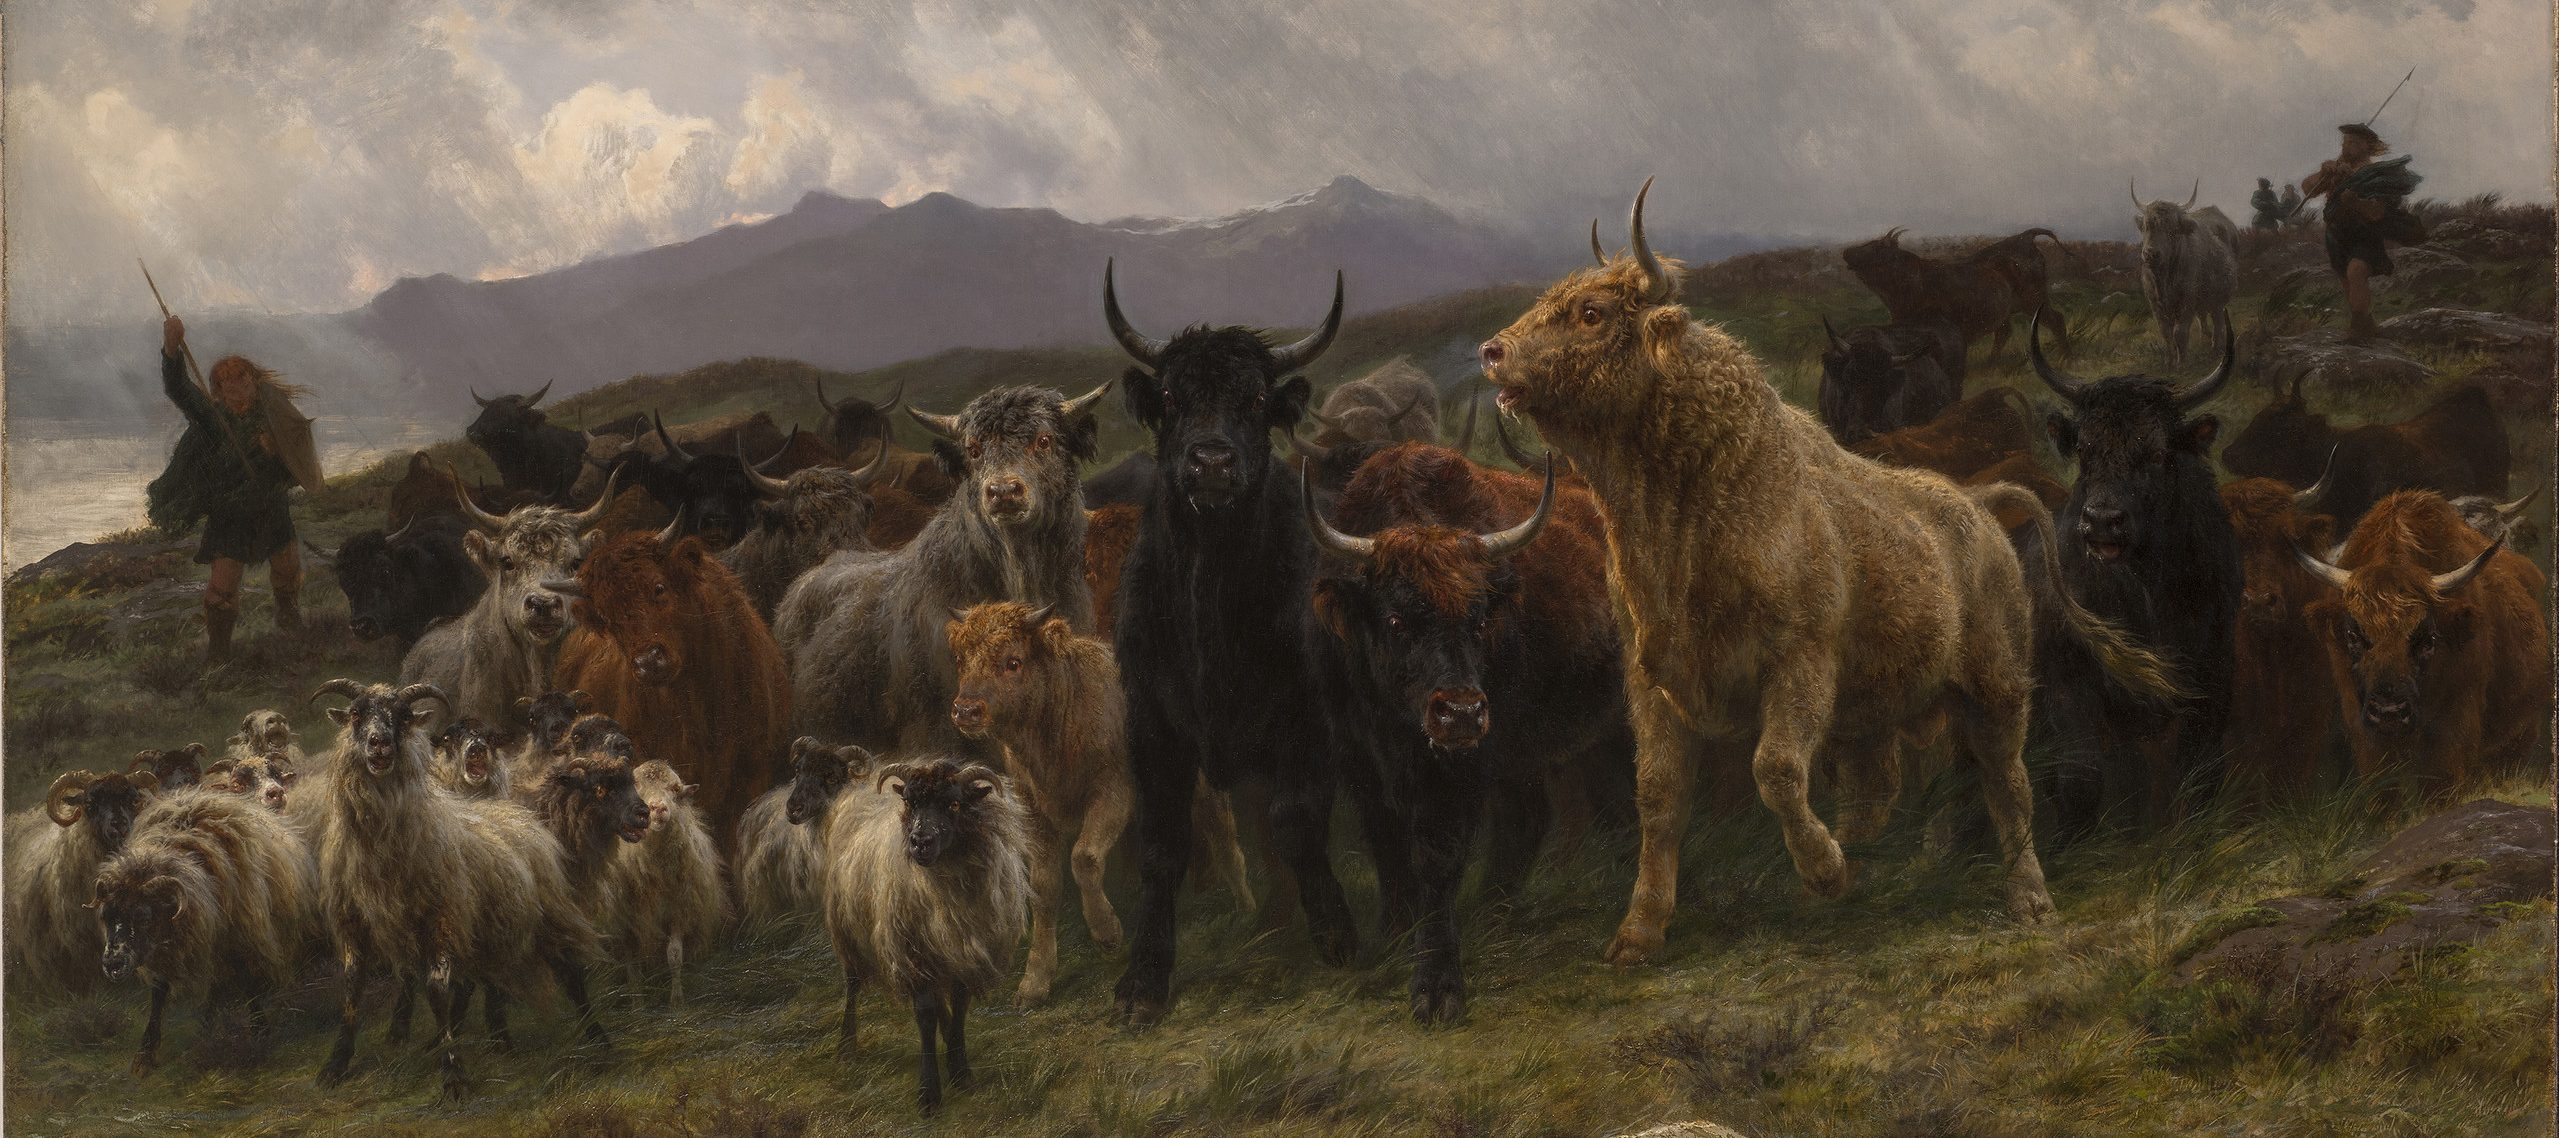 A large group of animals is herded by two shepherds on a grassy hill above the ocean. Black, tan, and red bulls crowd small white sheep with curled horns. The animals move nervously, their coats blowing in the wind. Clouds in the background suggest an impending storm.